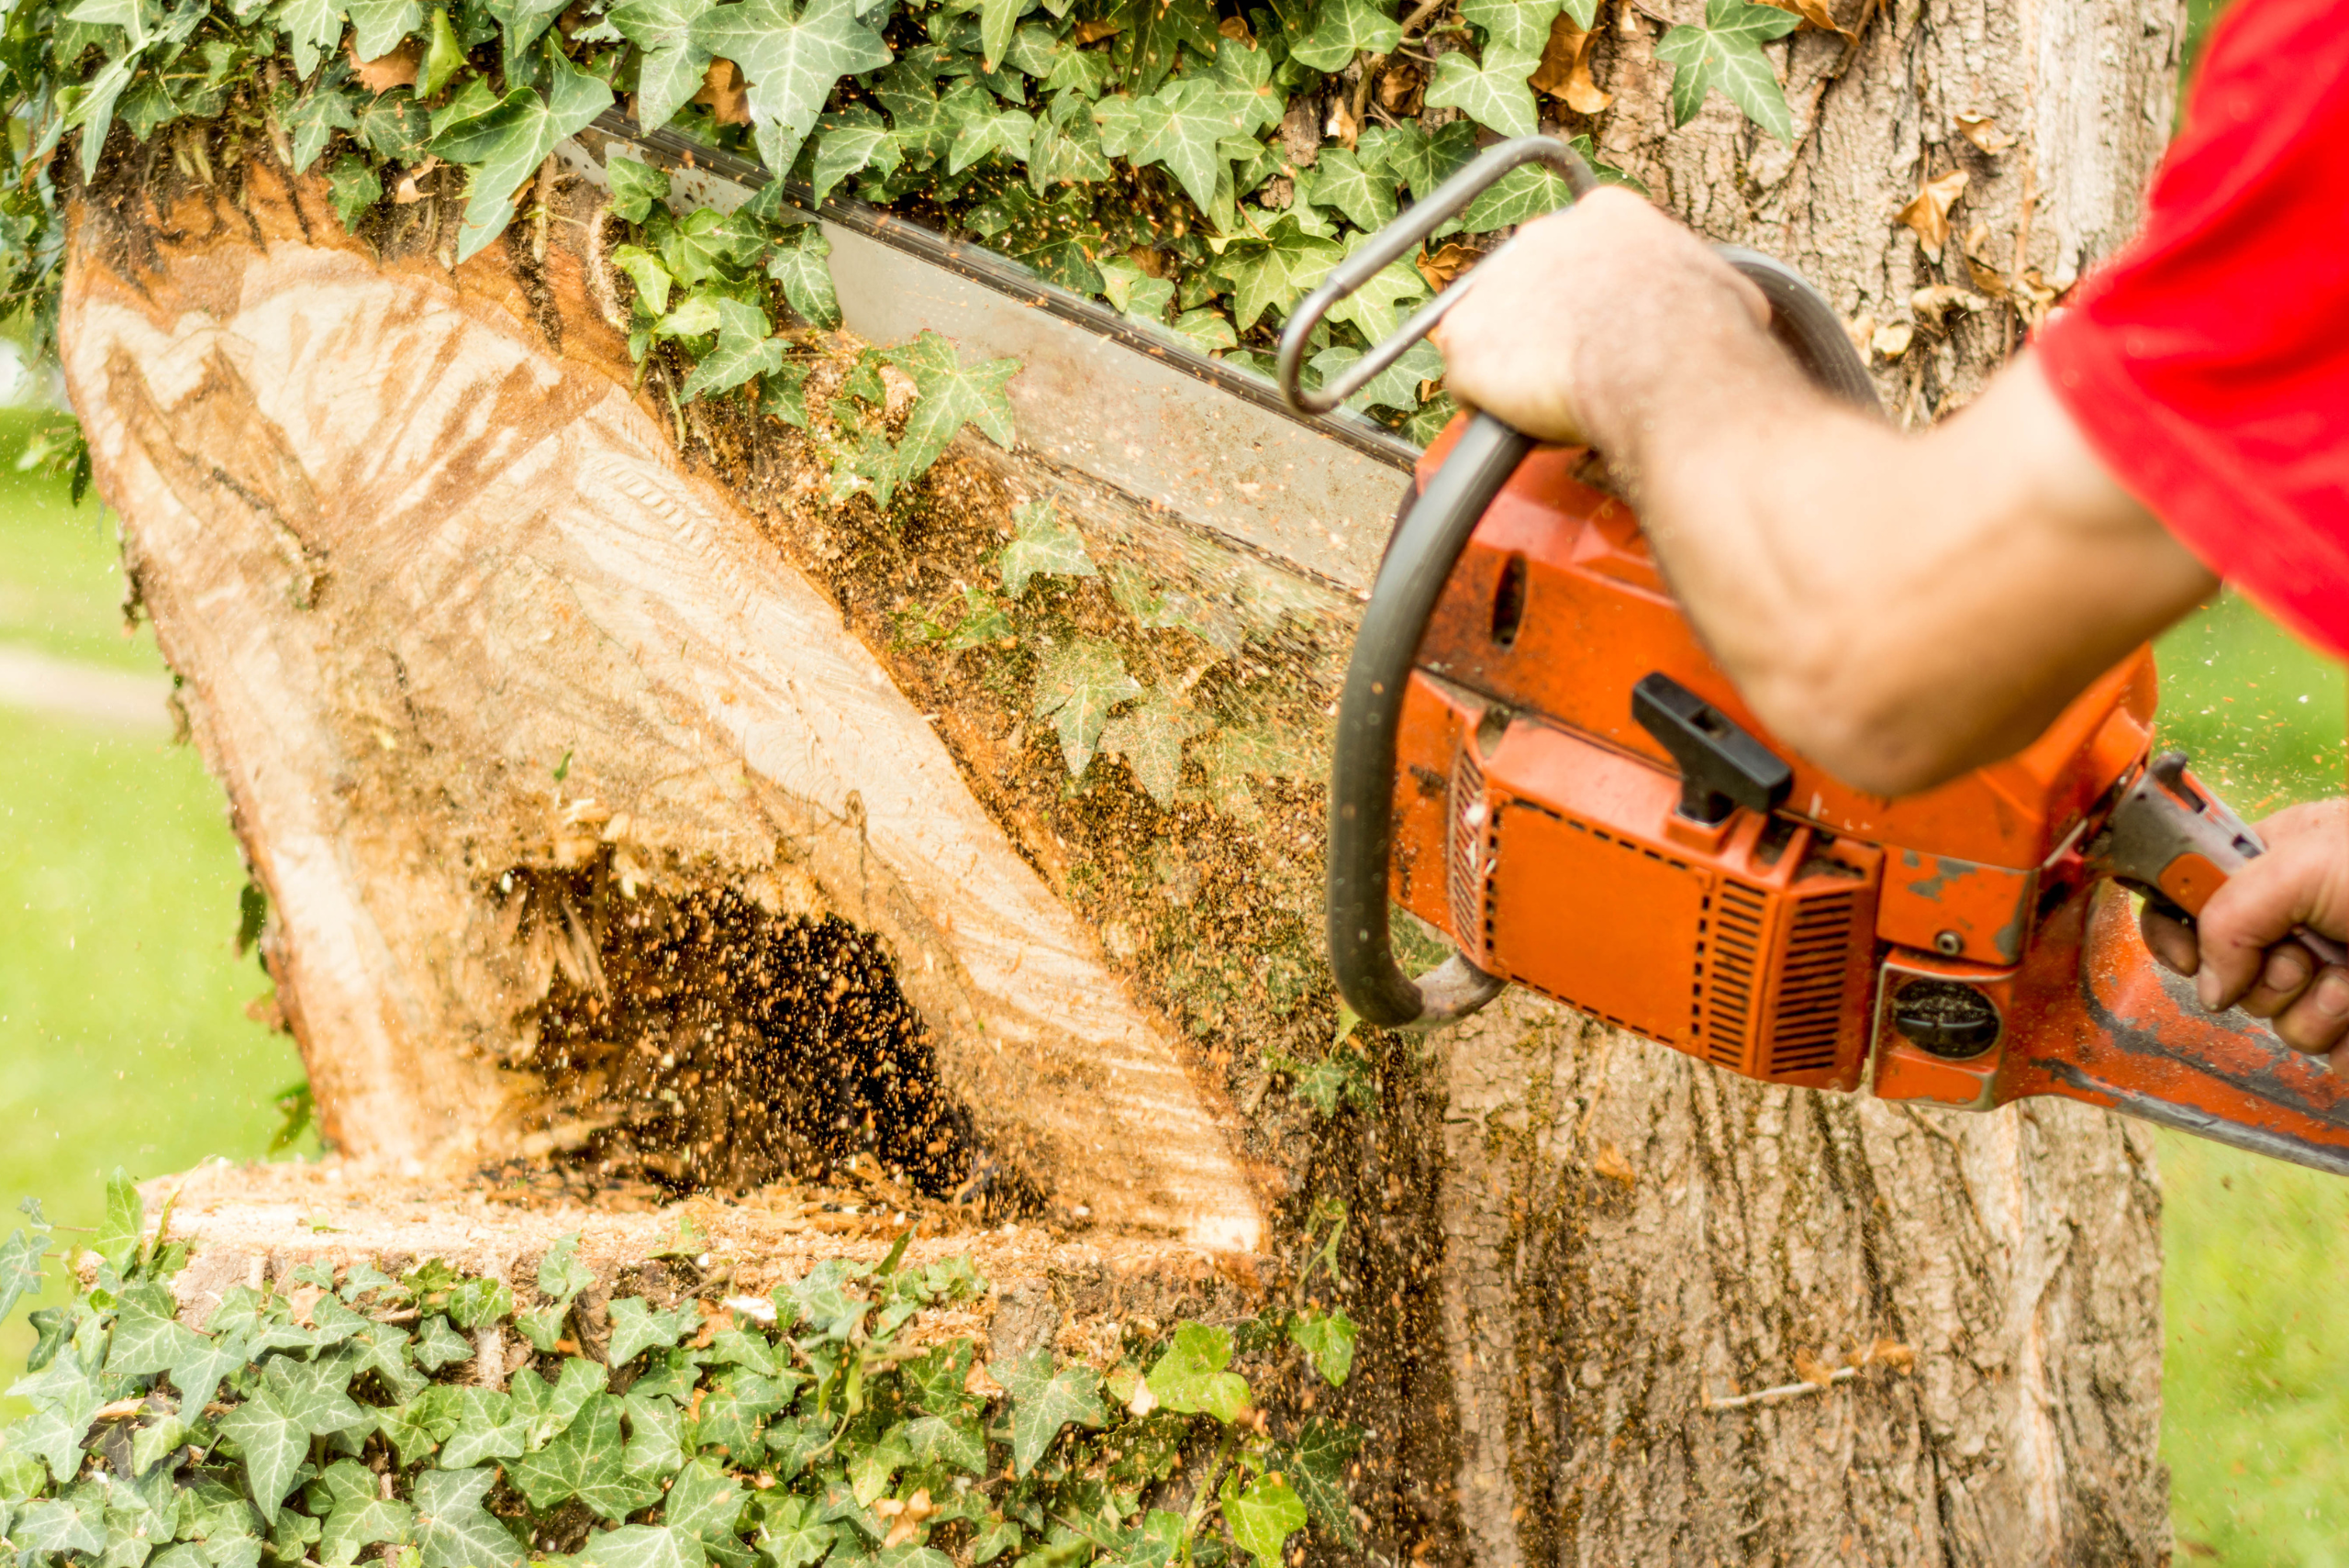 A closeup of someone felling a tree using a chainsaw.